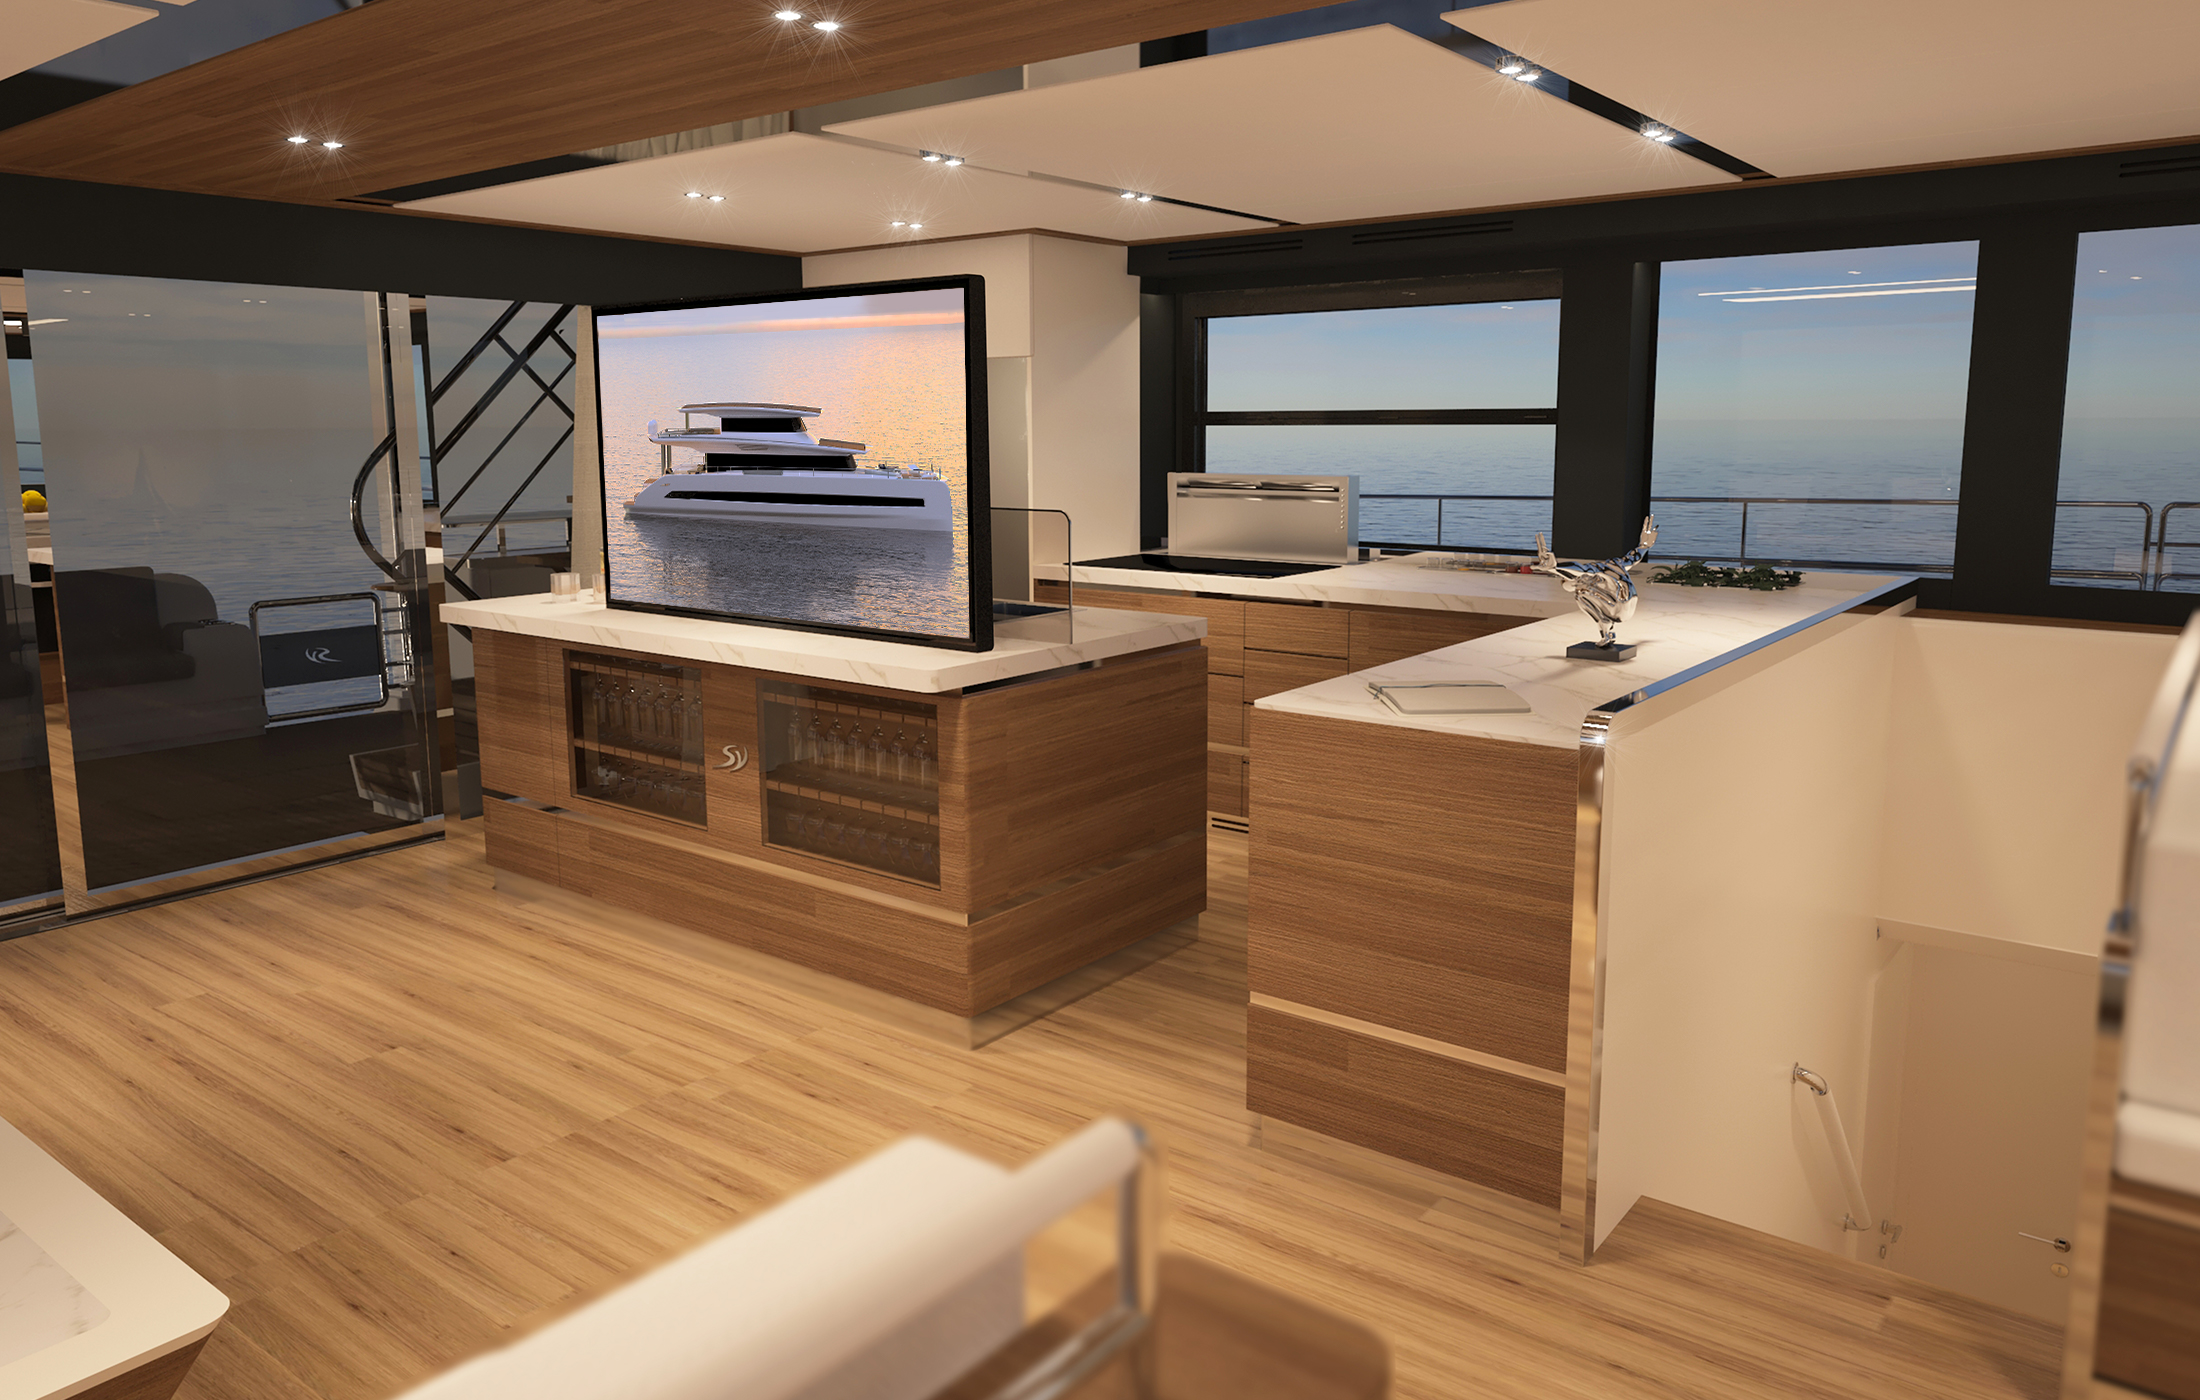 Main deck saloon with a big TV in a solar powered yacht